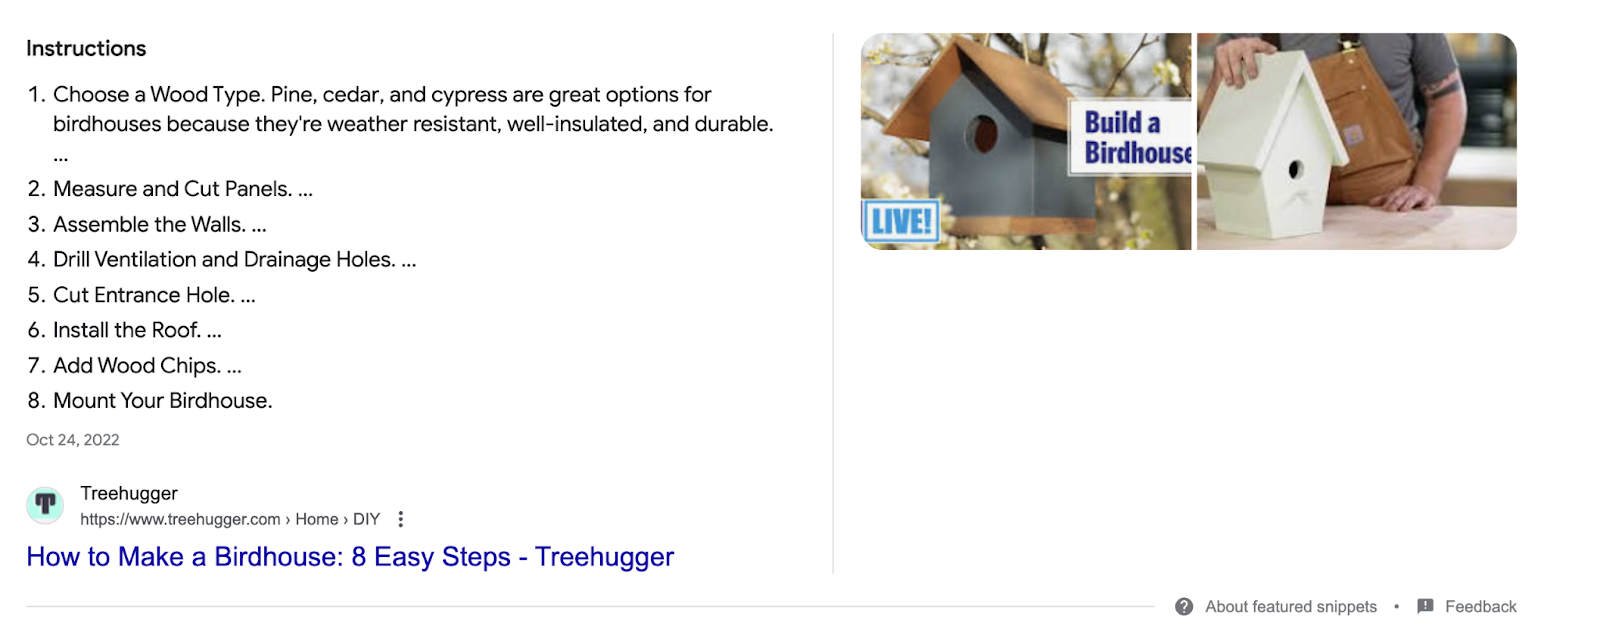 search for how to build a birdhouse shows list of steps in featured snippet